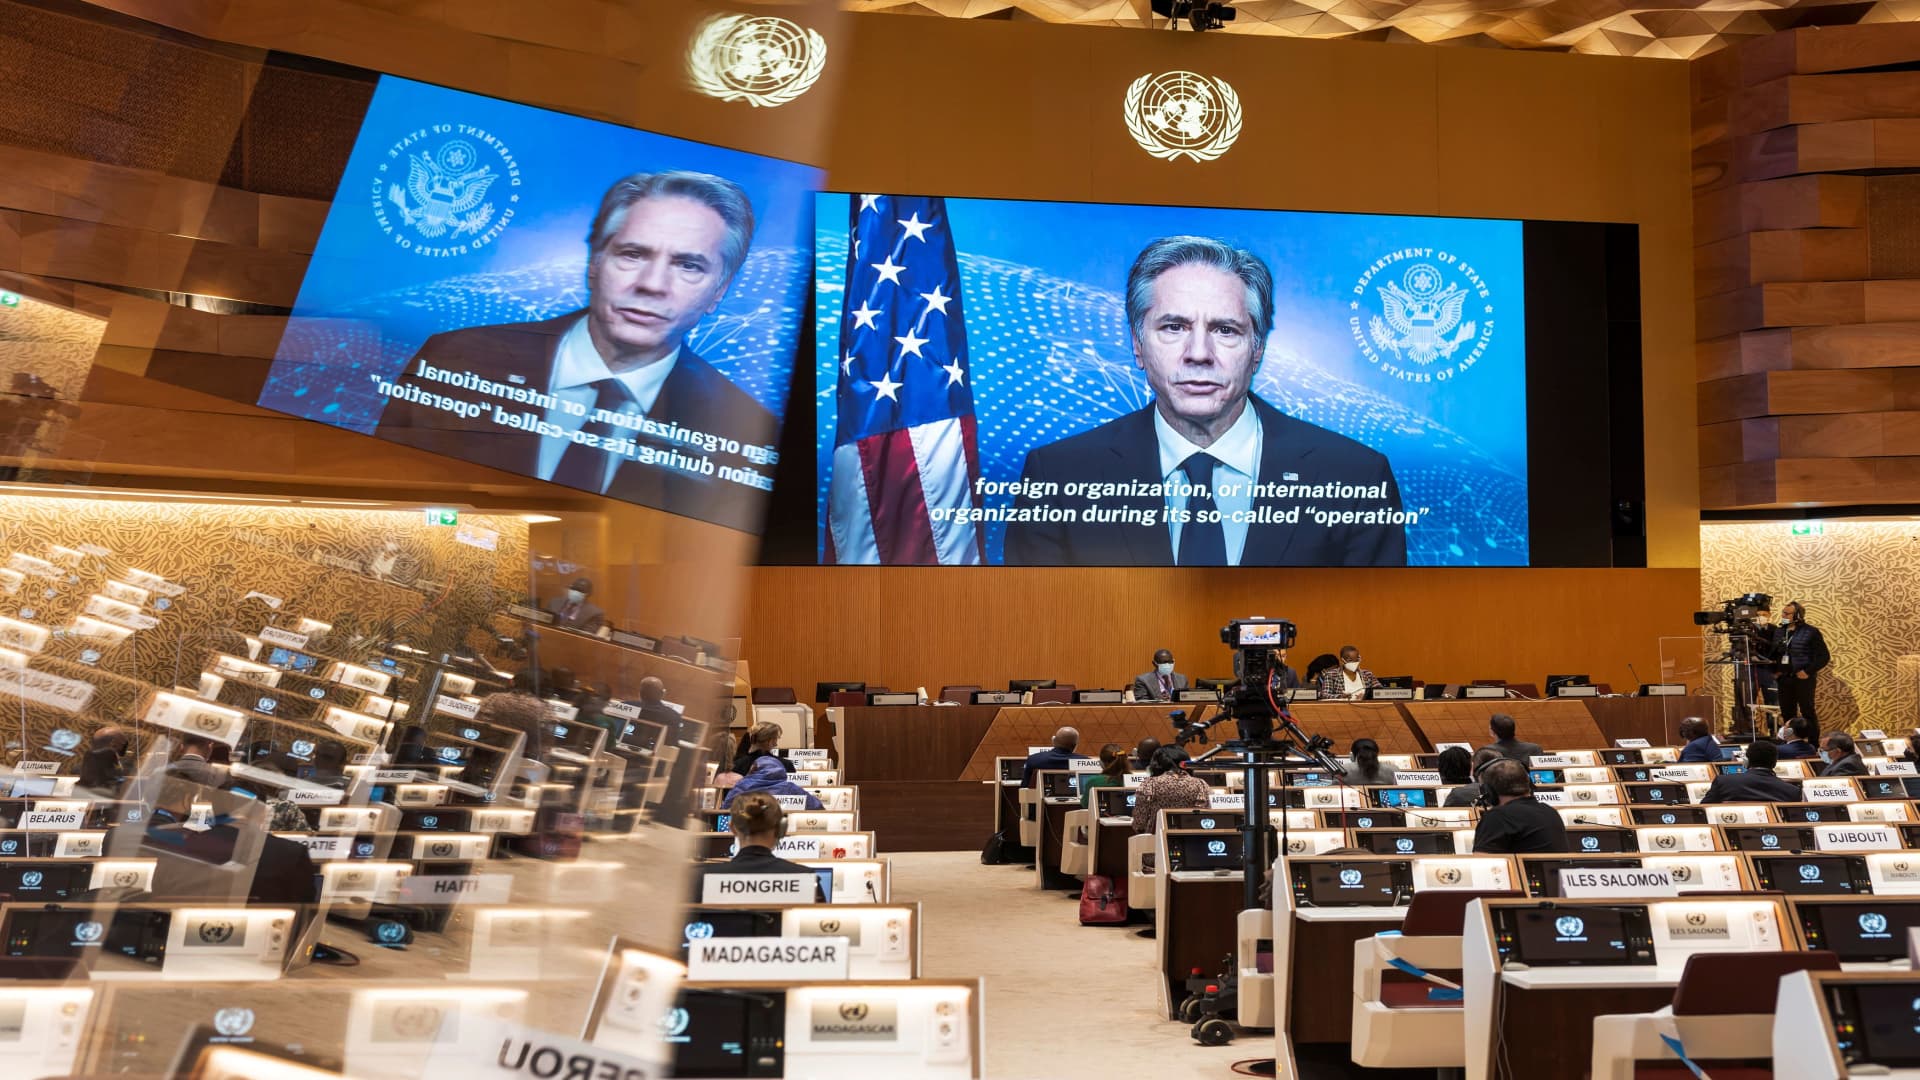 U.S. Secretary of State Antony Blinken appears on a screen as he delivers a speech during the 49th session of the UN Human Rights Council at the European headquarters of the United Nations in Geneva, Switzerland, March 1, 2022.